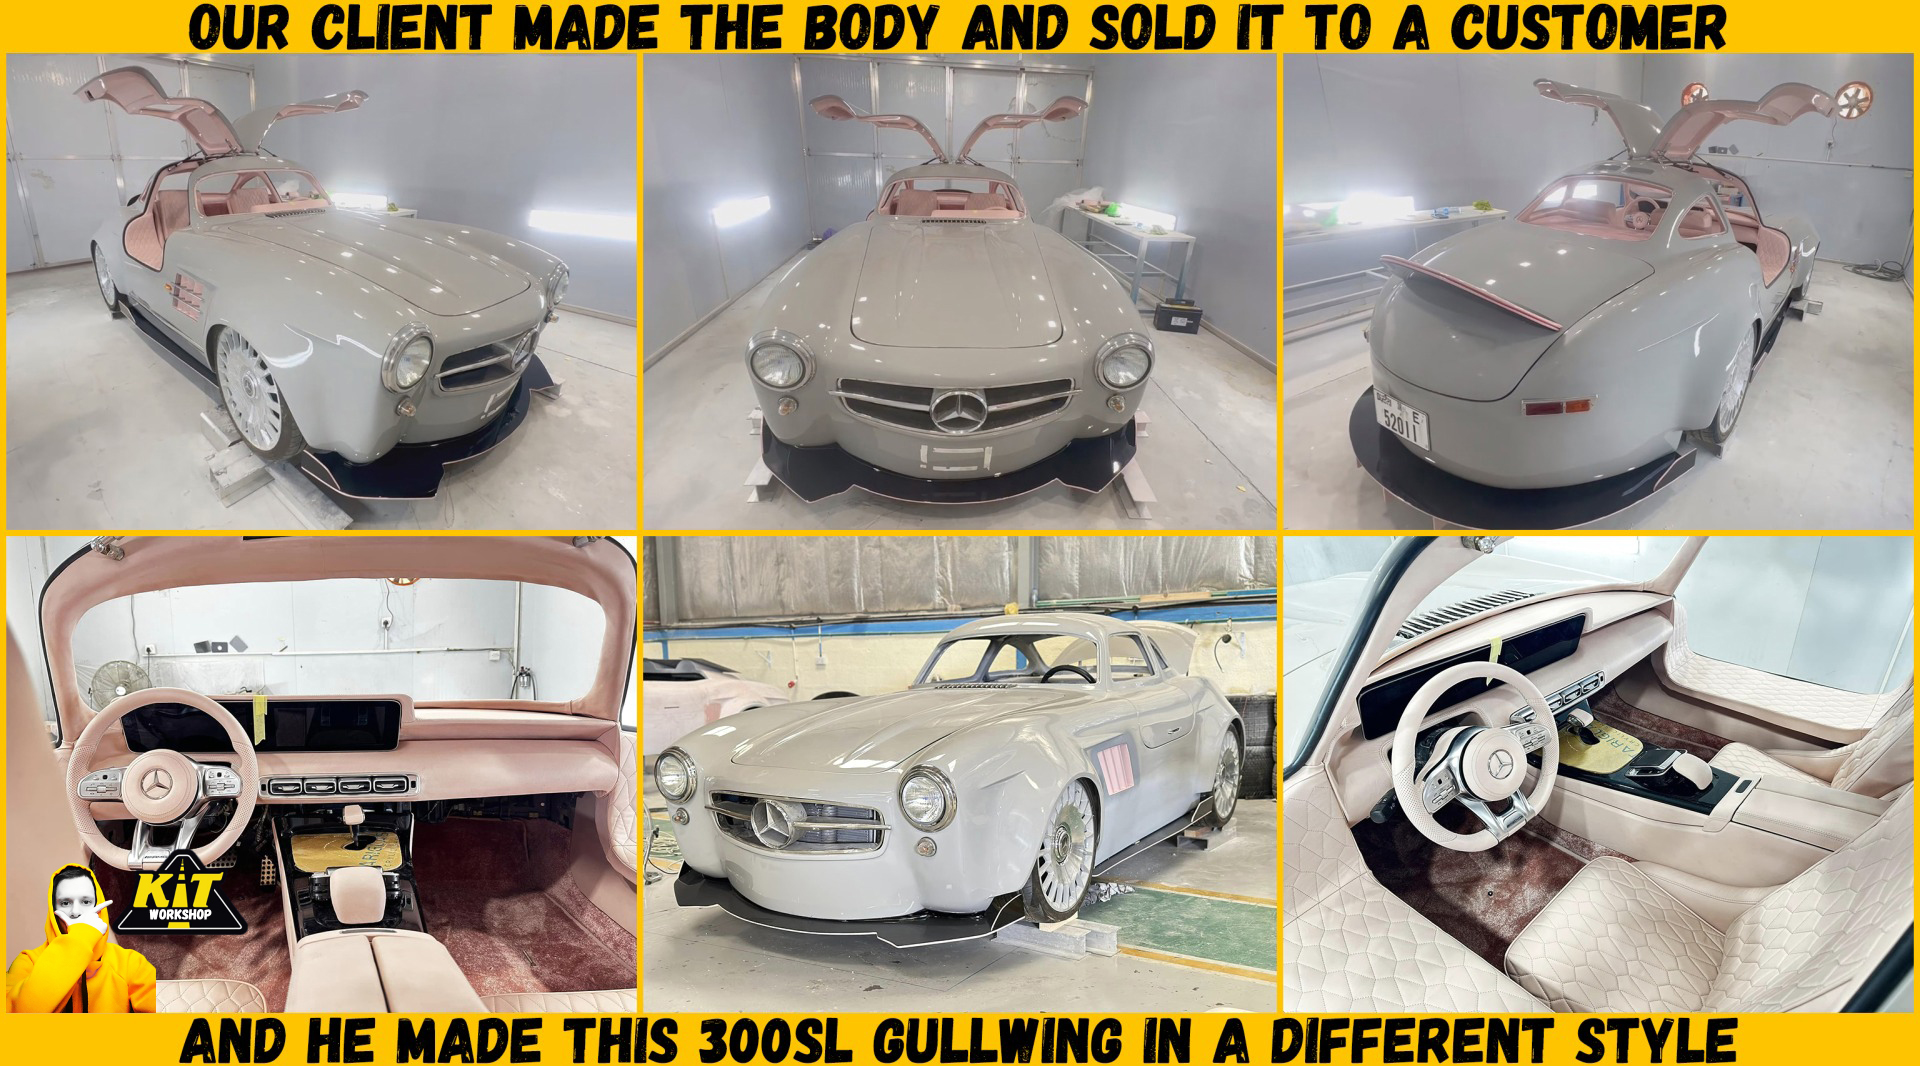 Mercedes 300SL Gullwing replica with different style